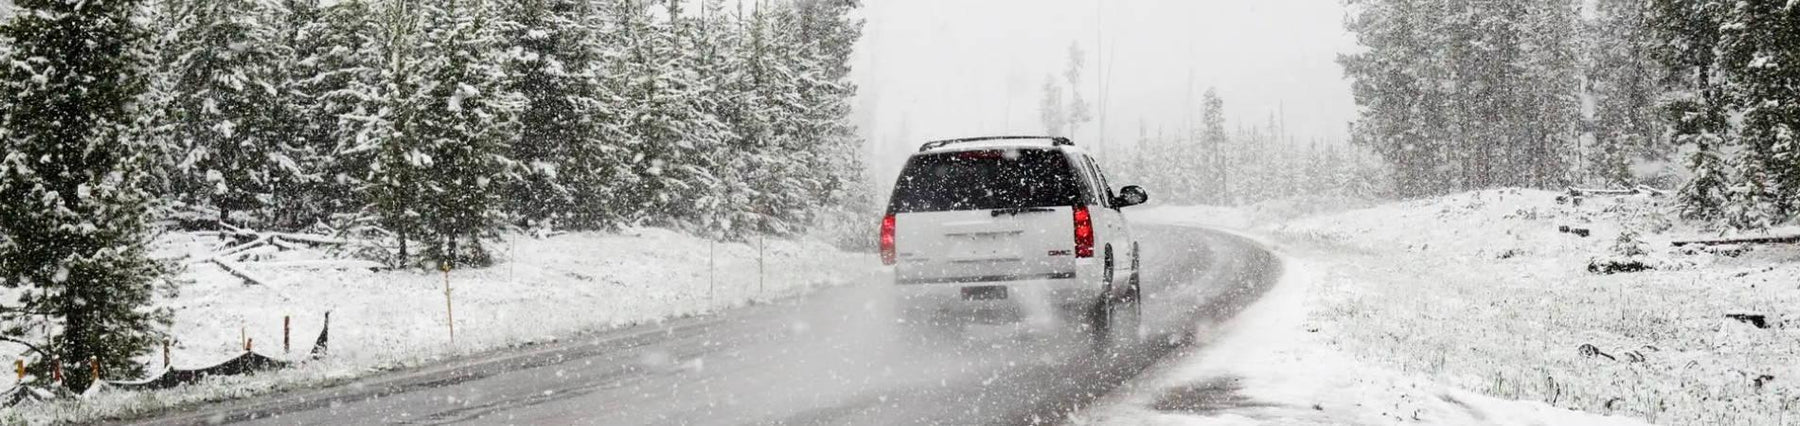 How Does a High-Quality Dash Cam Help During Winter Drives? - - BlackboxMyCar Canada